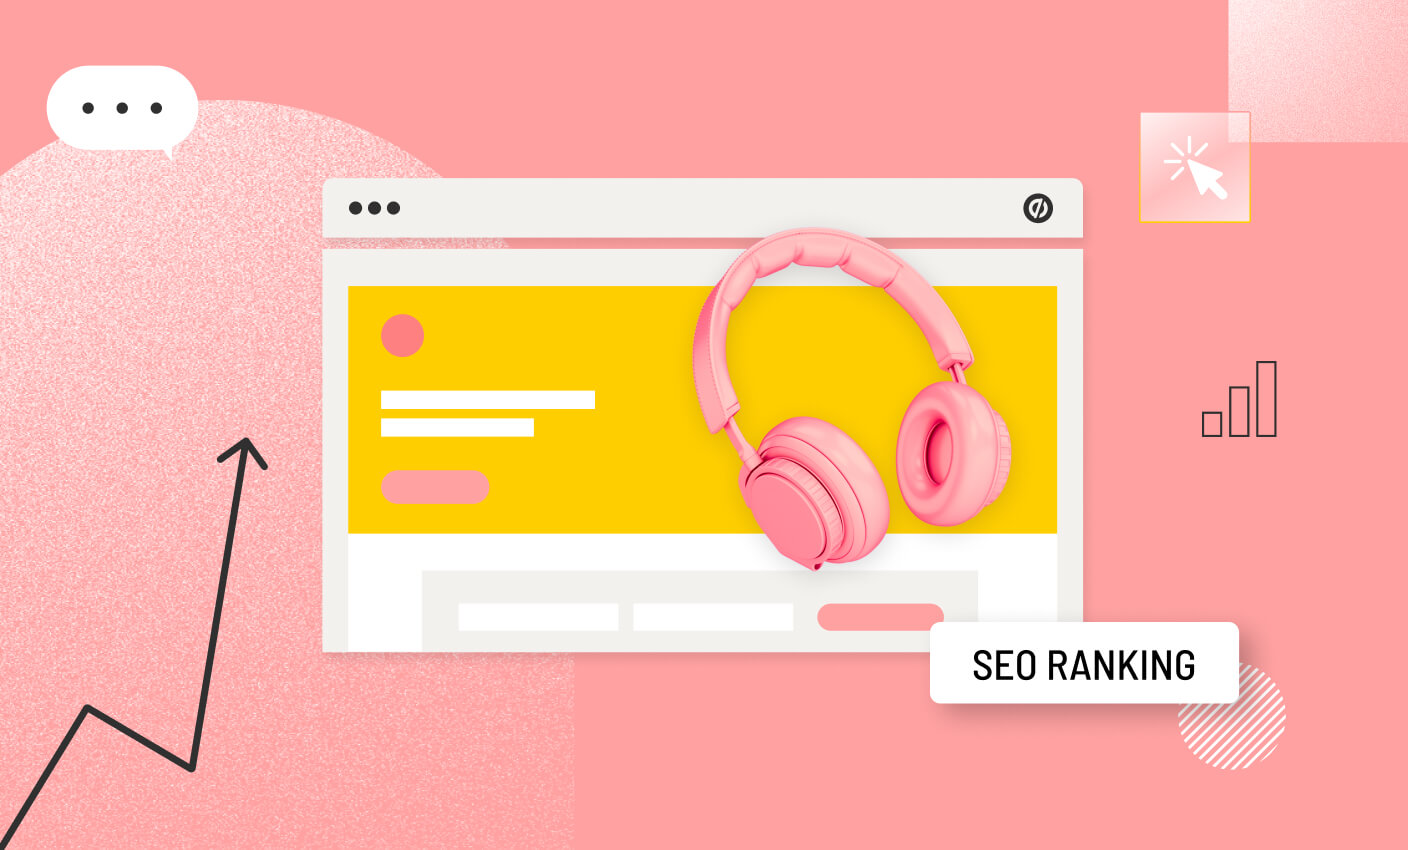 How to rank (and convert) with landing page SEO